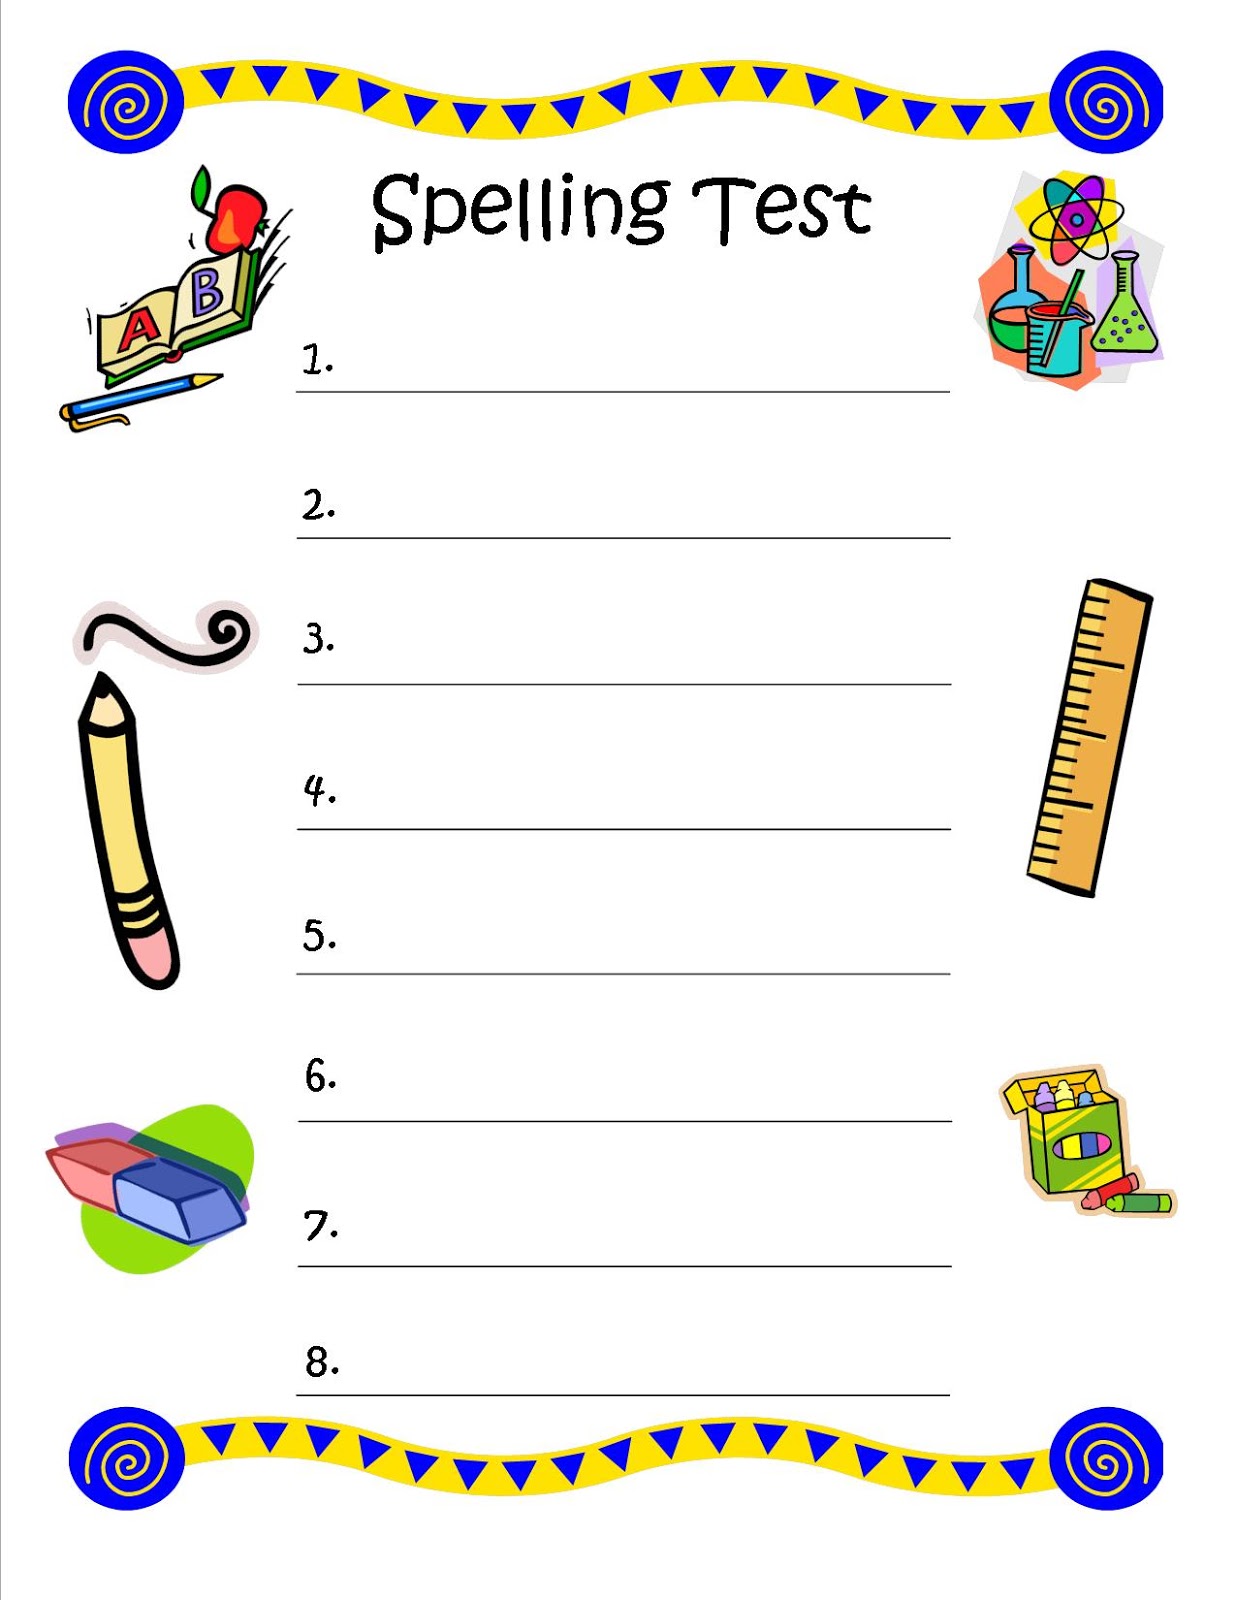 Spelling Test Template Search Results Calendar 2015